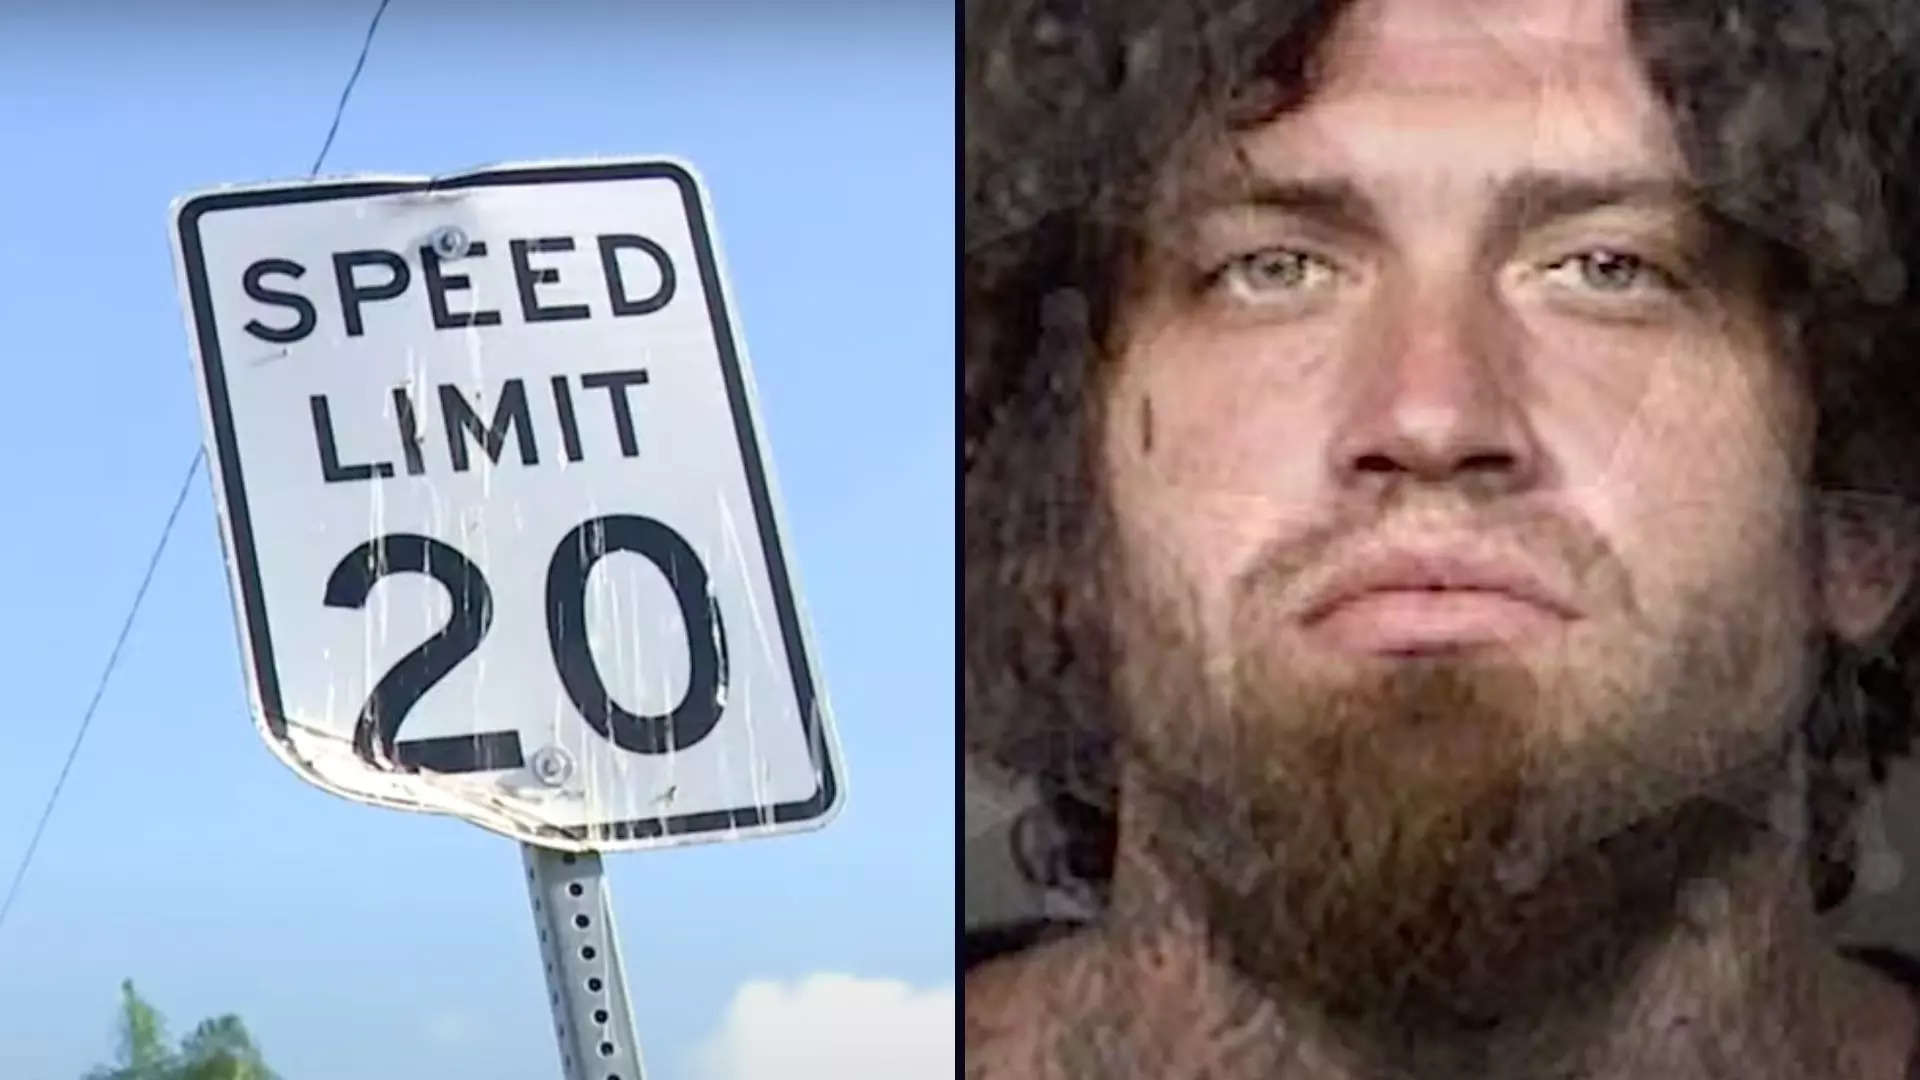 Florida Man blows up mailbox of landscaping customer over 20 dispute | Image courtesy: FOX 35 Orlando/Brevard County Sheriff's Office